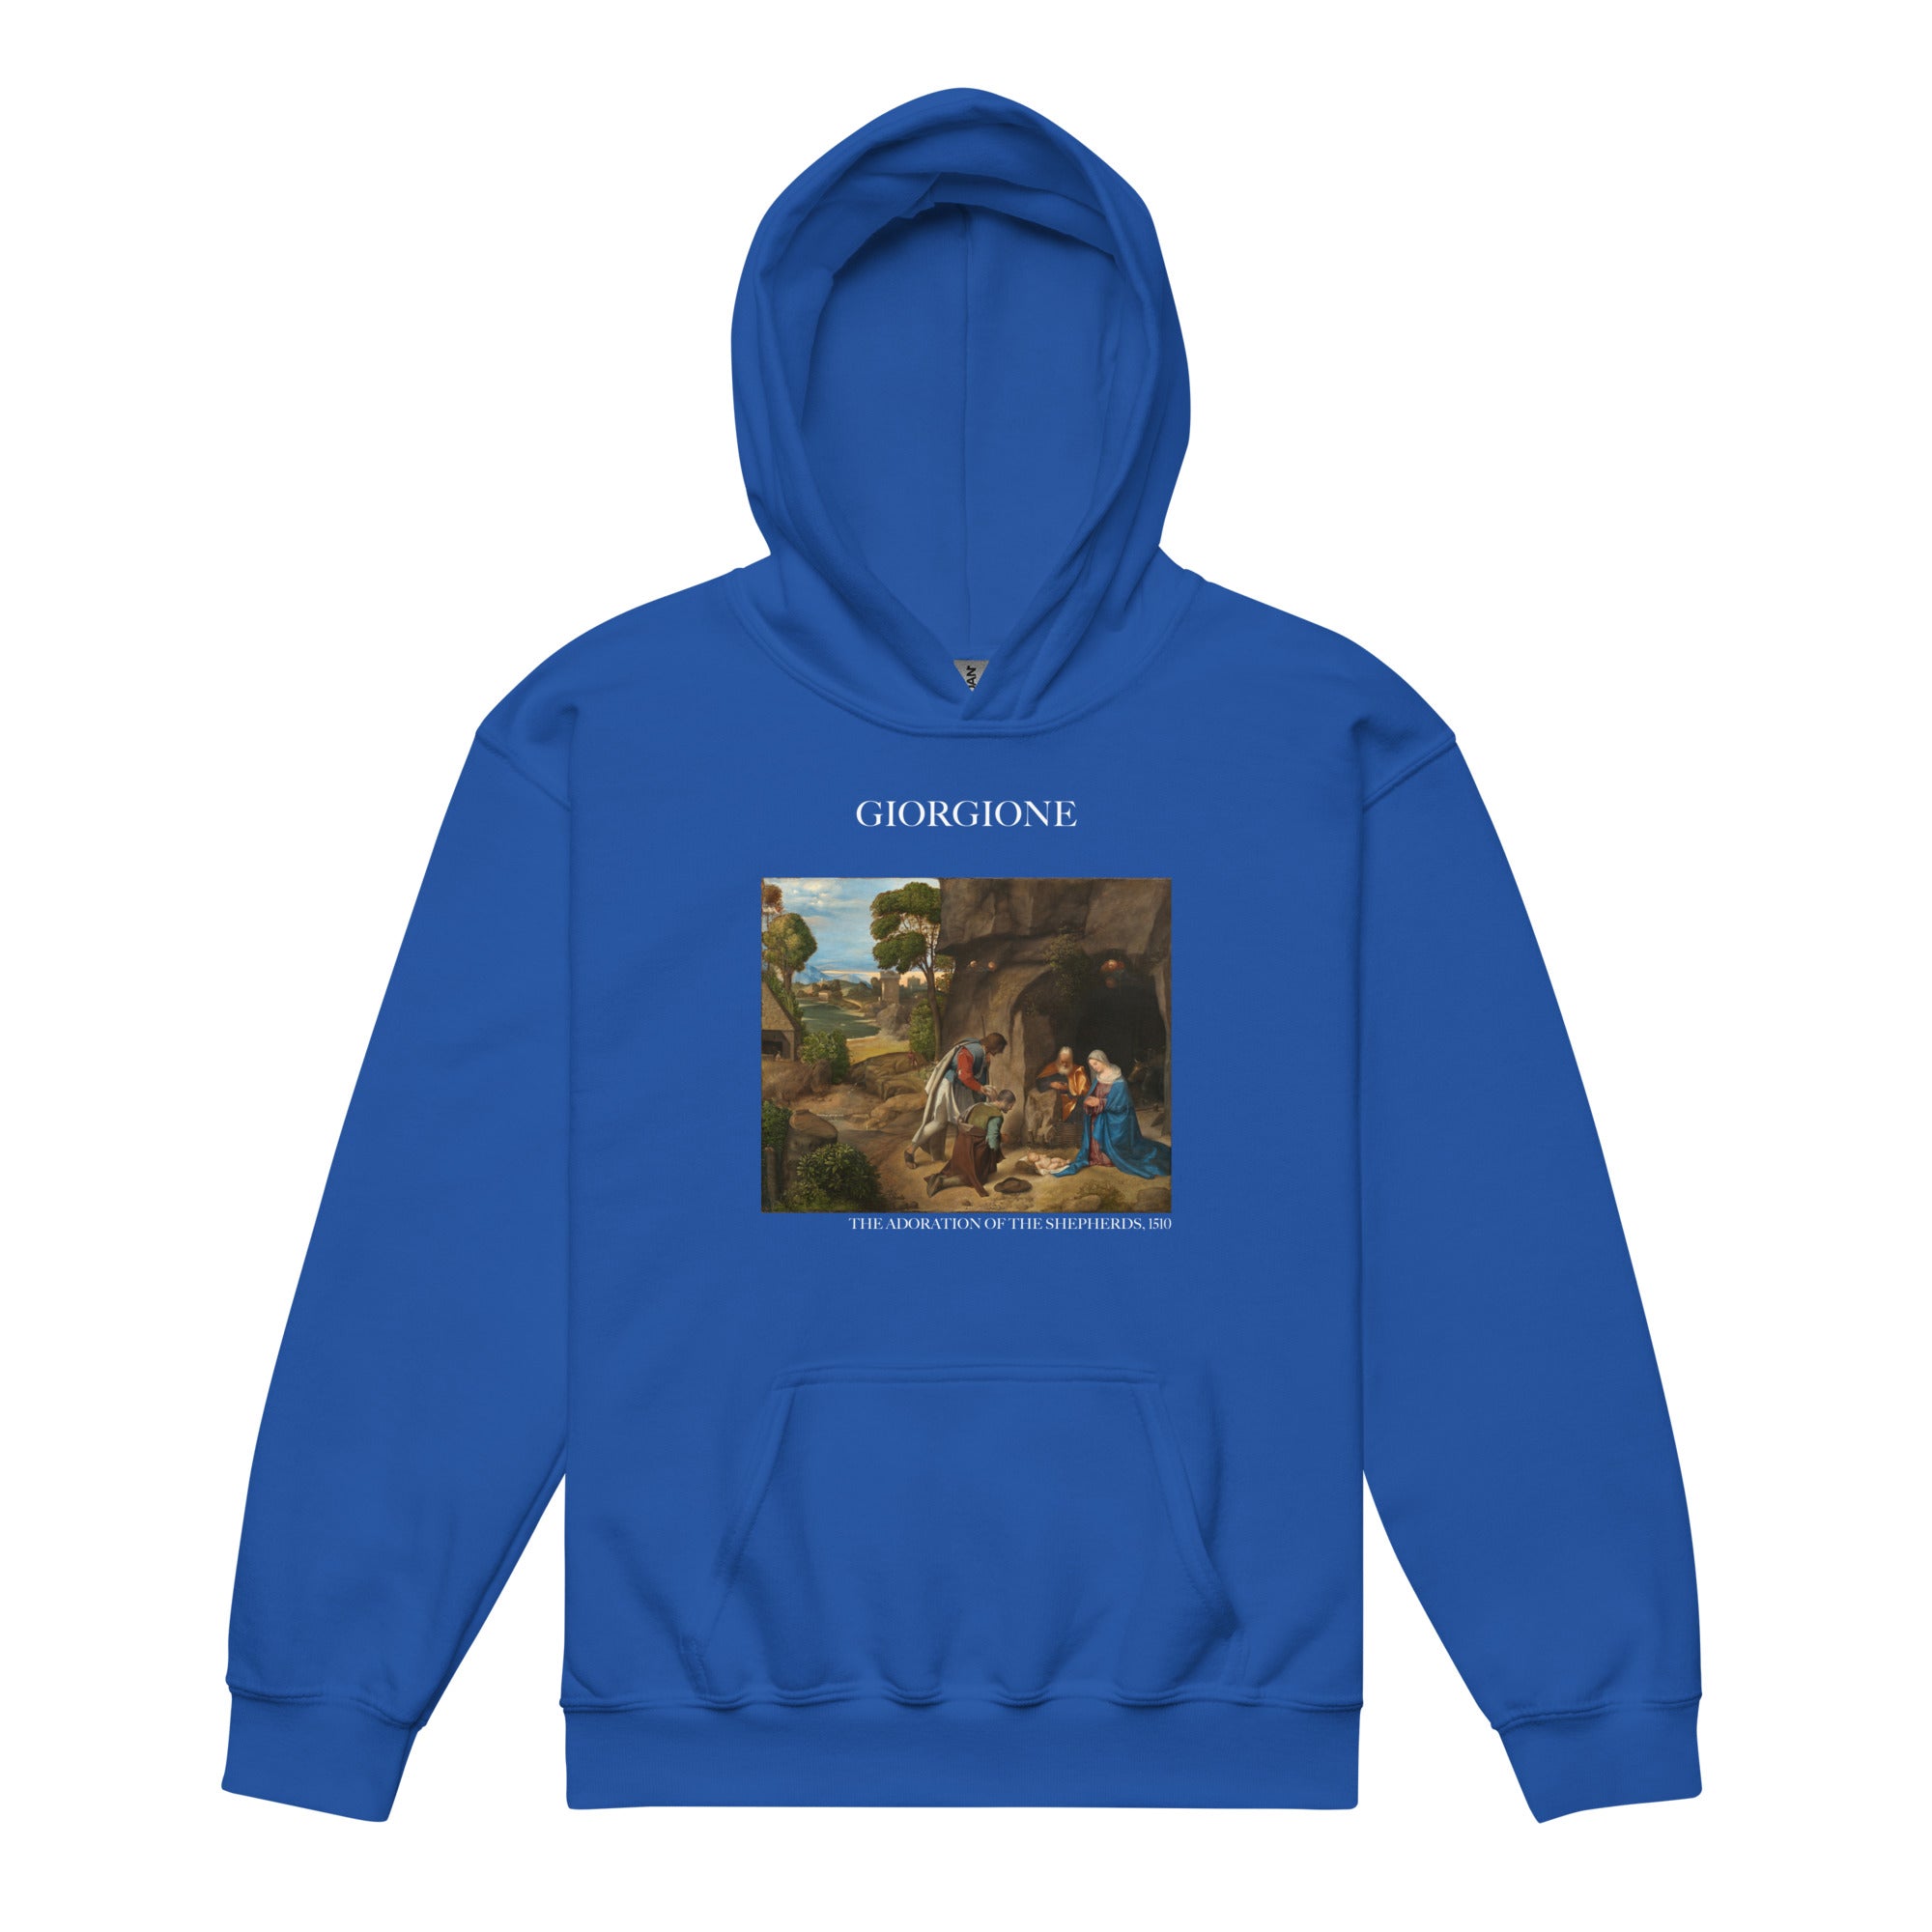 Giorgione 'The Adoration of the Shepherds' Famous Painting Hoodie | Premium Youth Art Hoodie